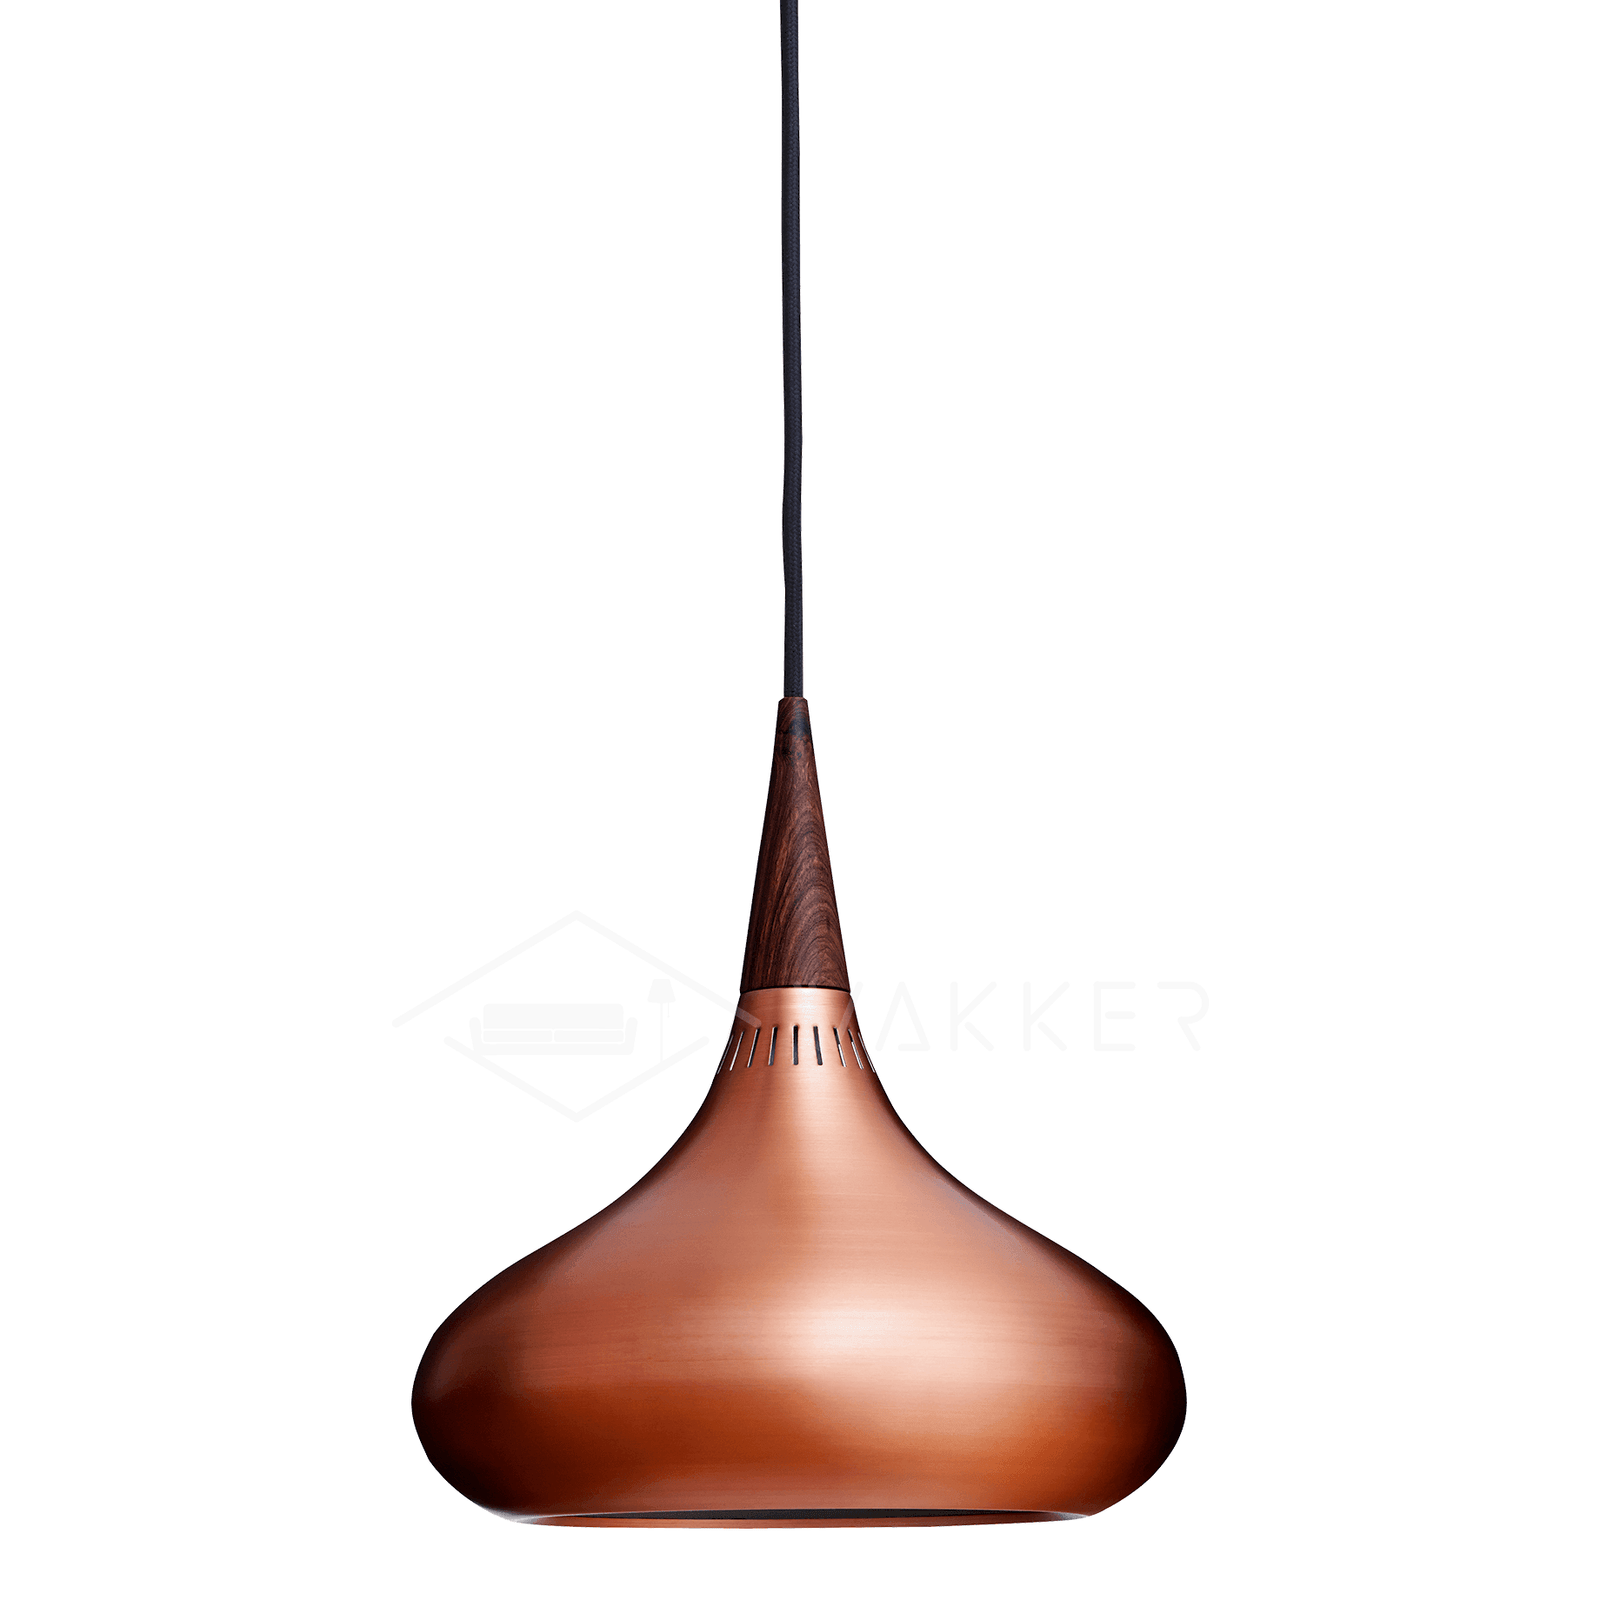 Copper Orient Pendant Light with a diameter of 11 inches and a height of 11.8 inches (34cm x 37cm)